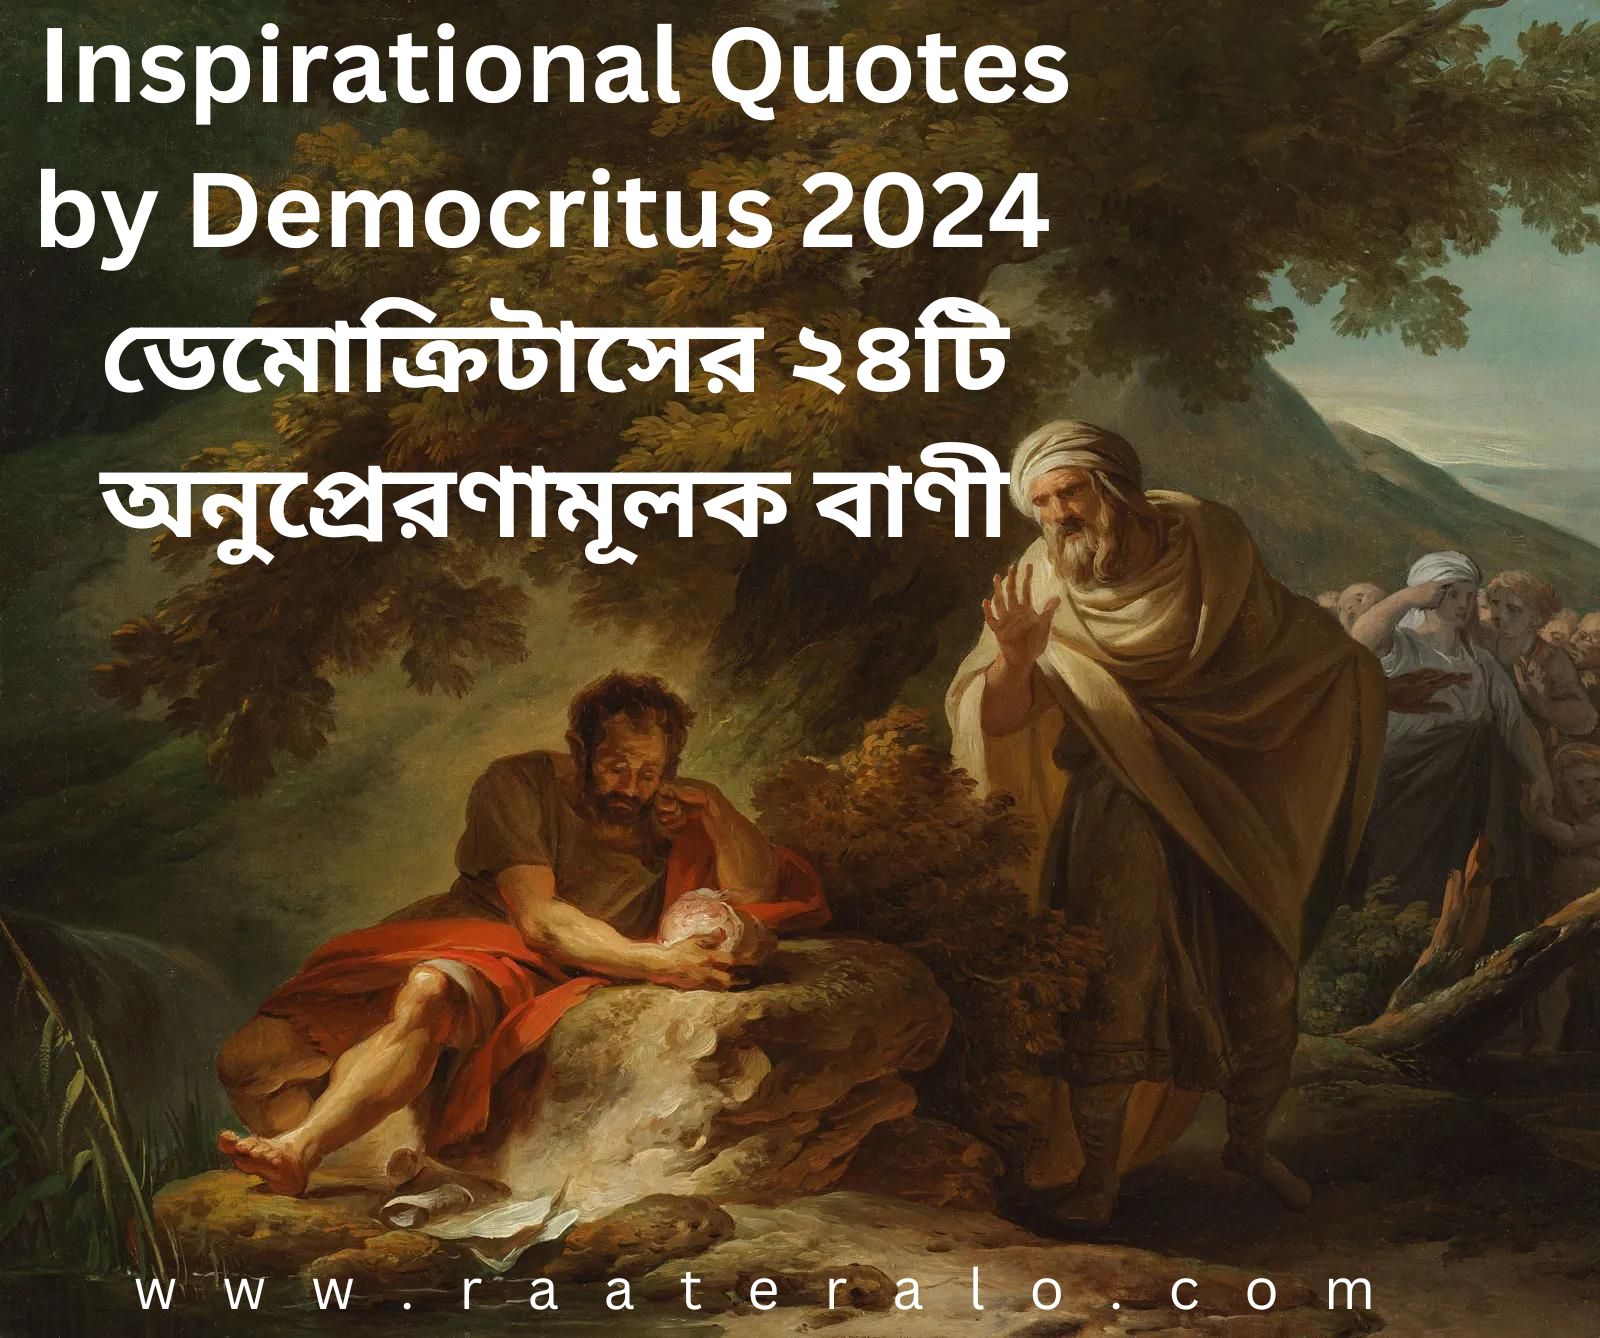 Inspirational Quotes by Democritus